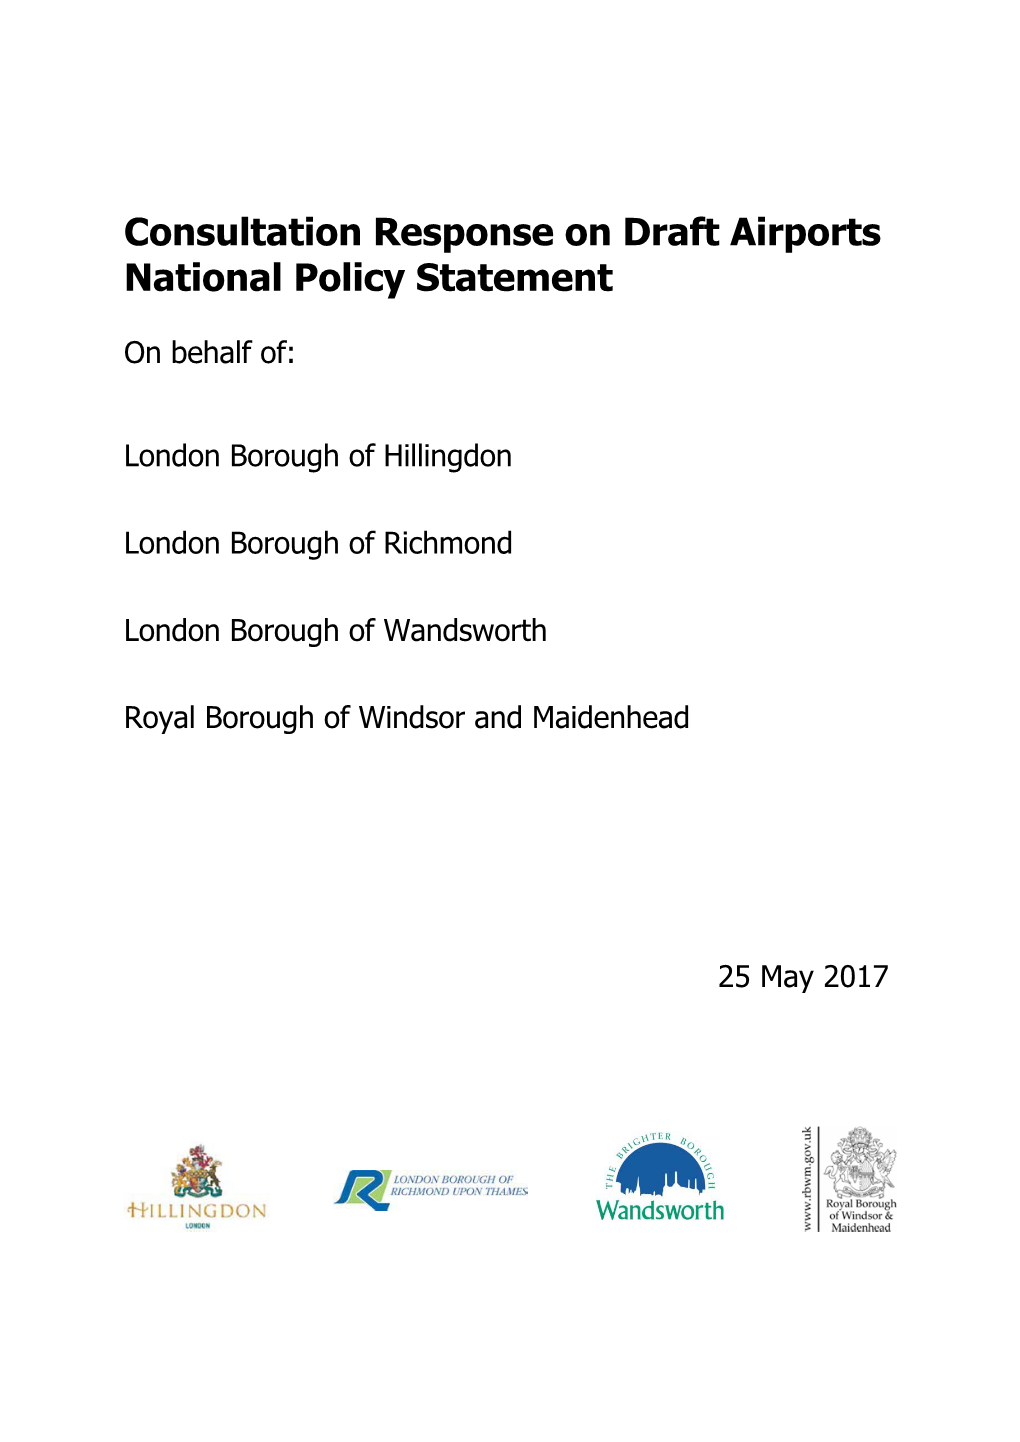 Consultation Response on Draft Airports National Policy Statement